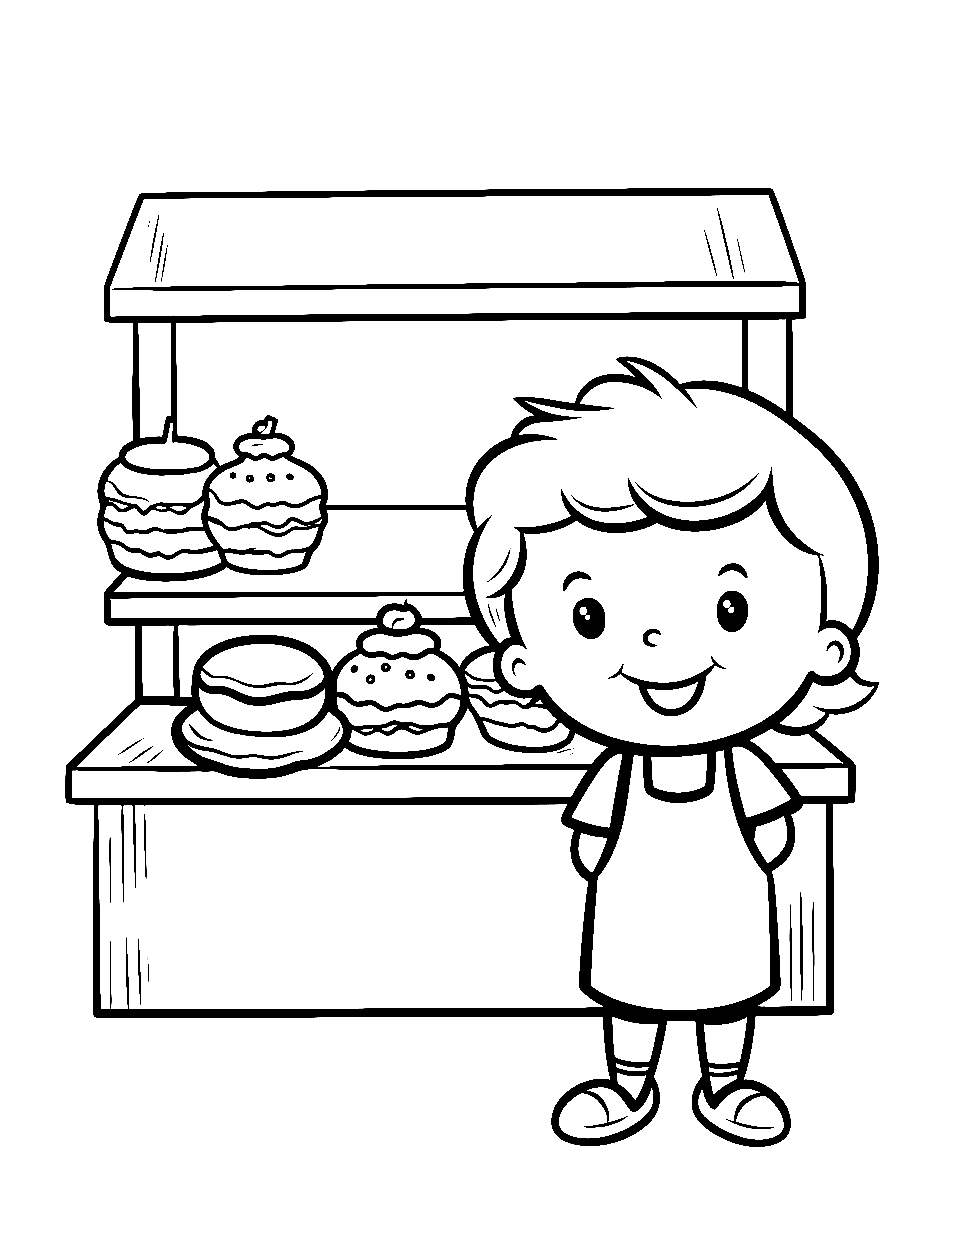 Kid's Snack Bar Food Coloring Page - Kid and his snacks with a snack stand.